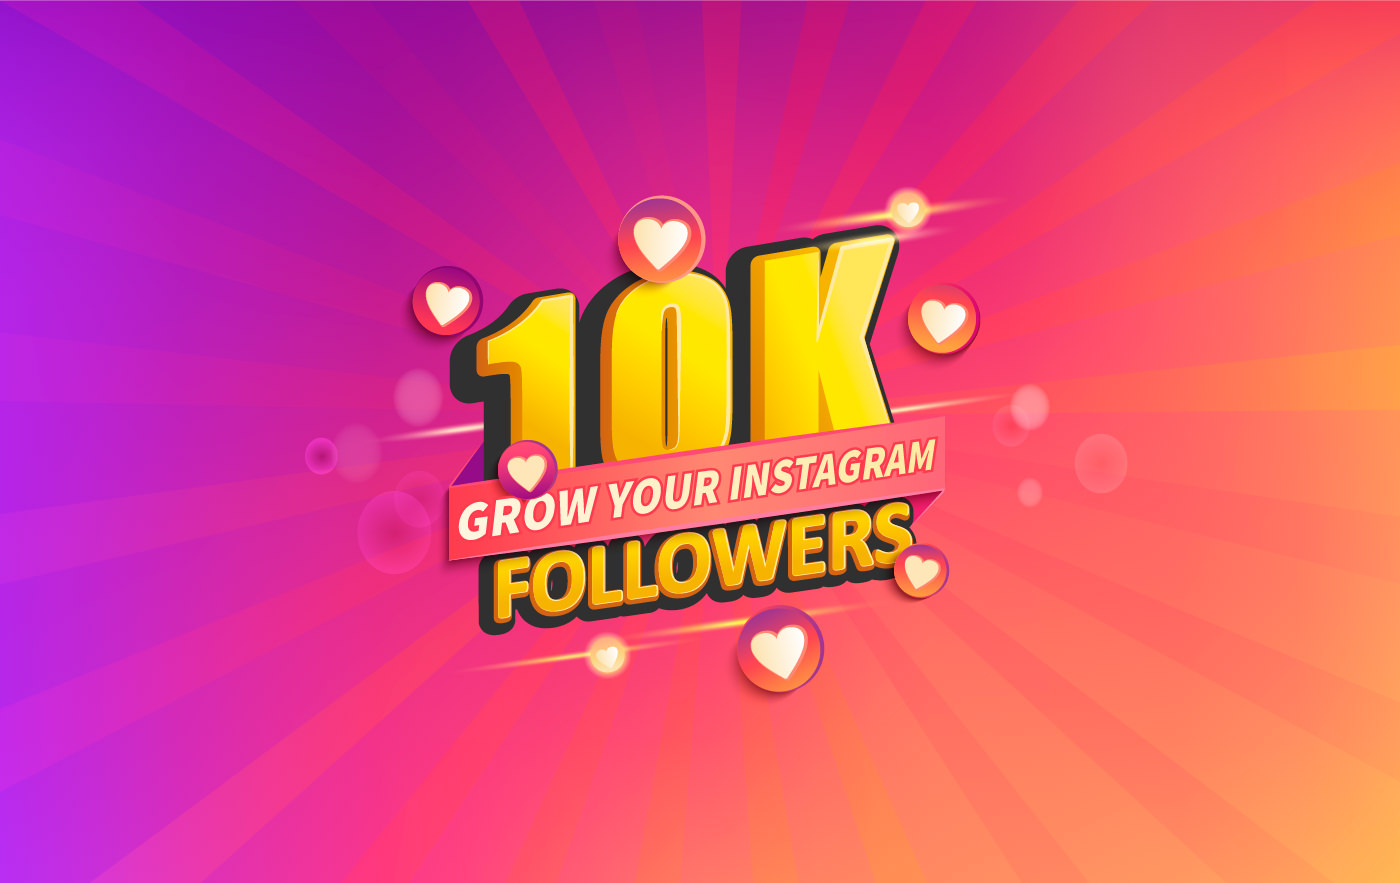 7 Tips to Grow Your Instagram Account to 10k Followers - 1400 x 883 jpeg 142kB